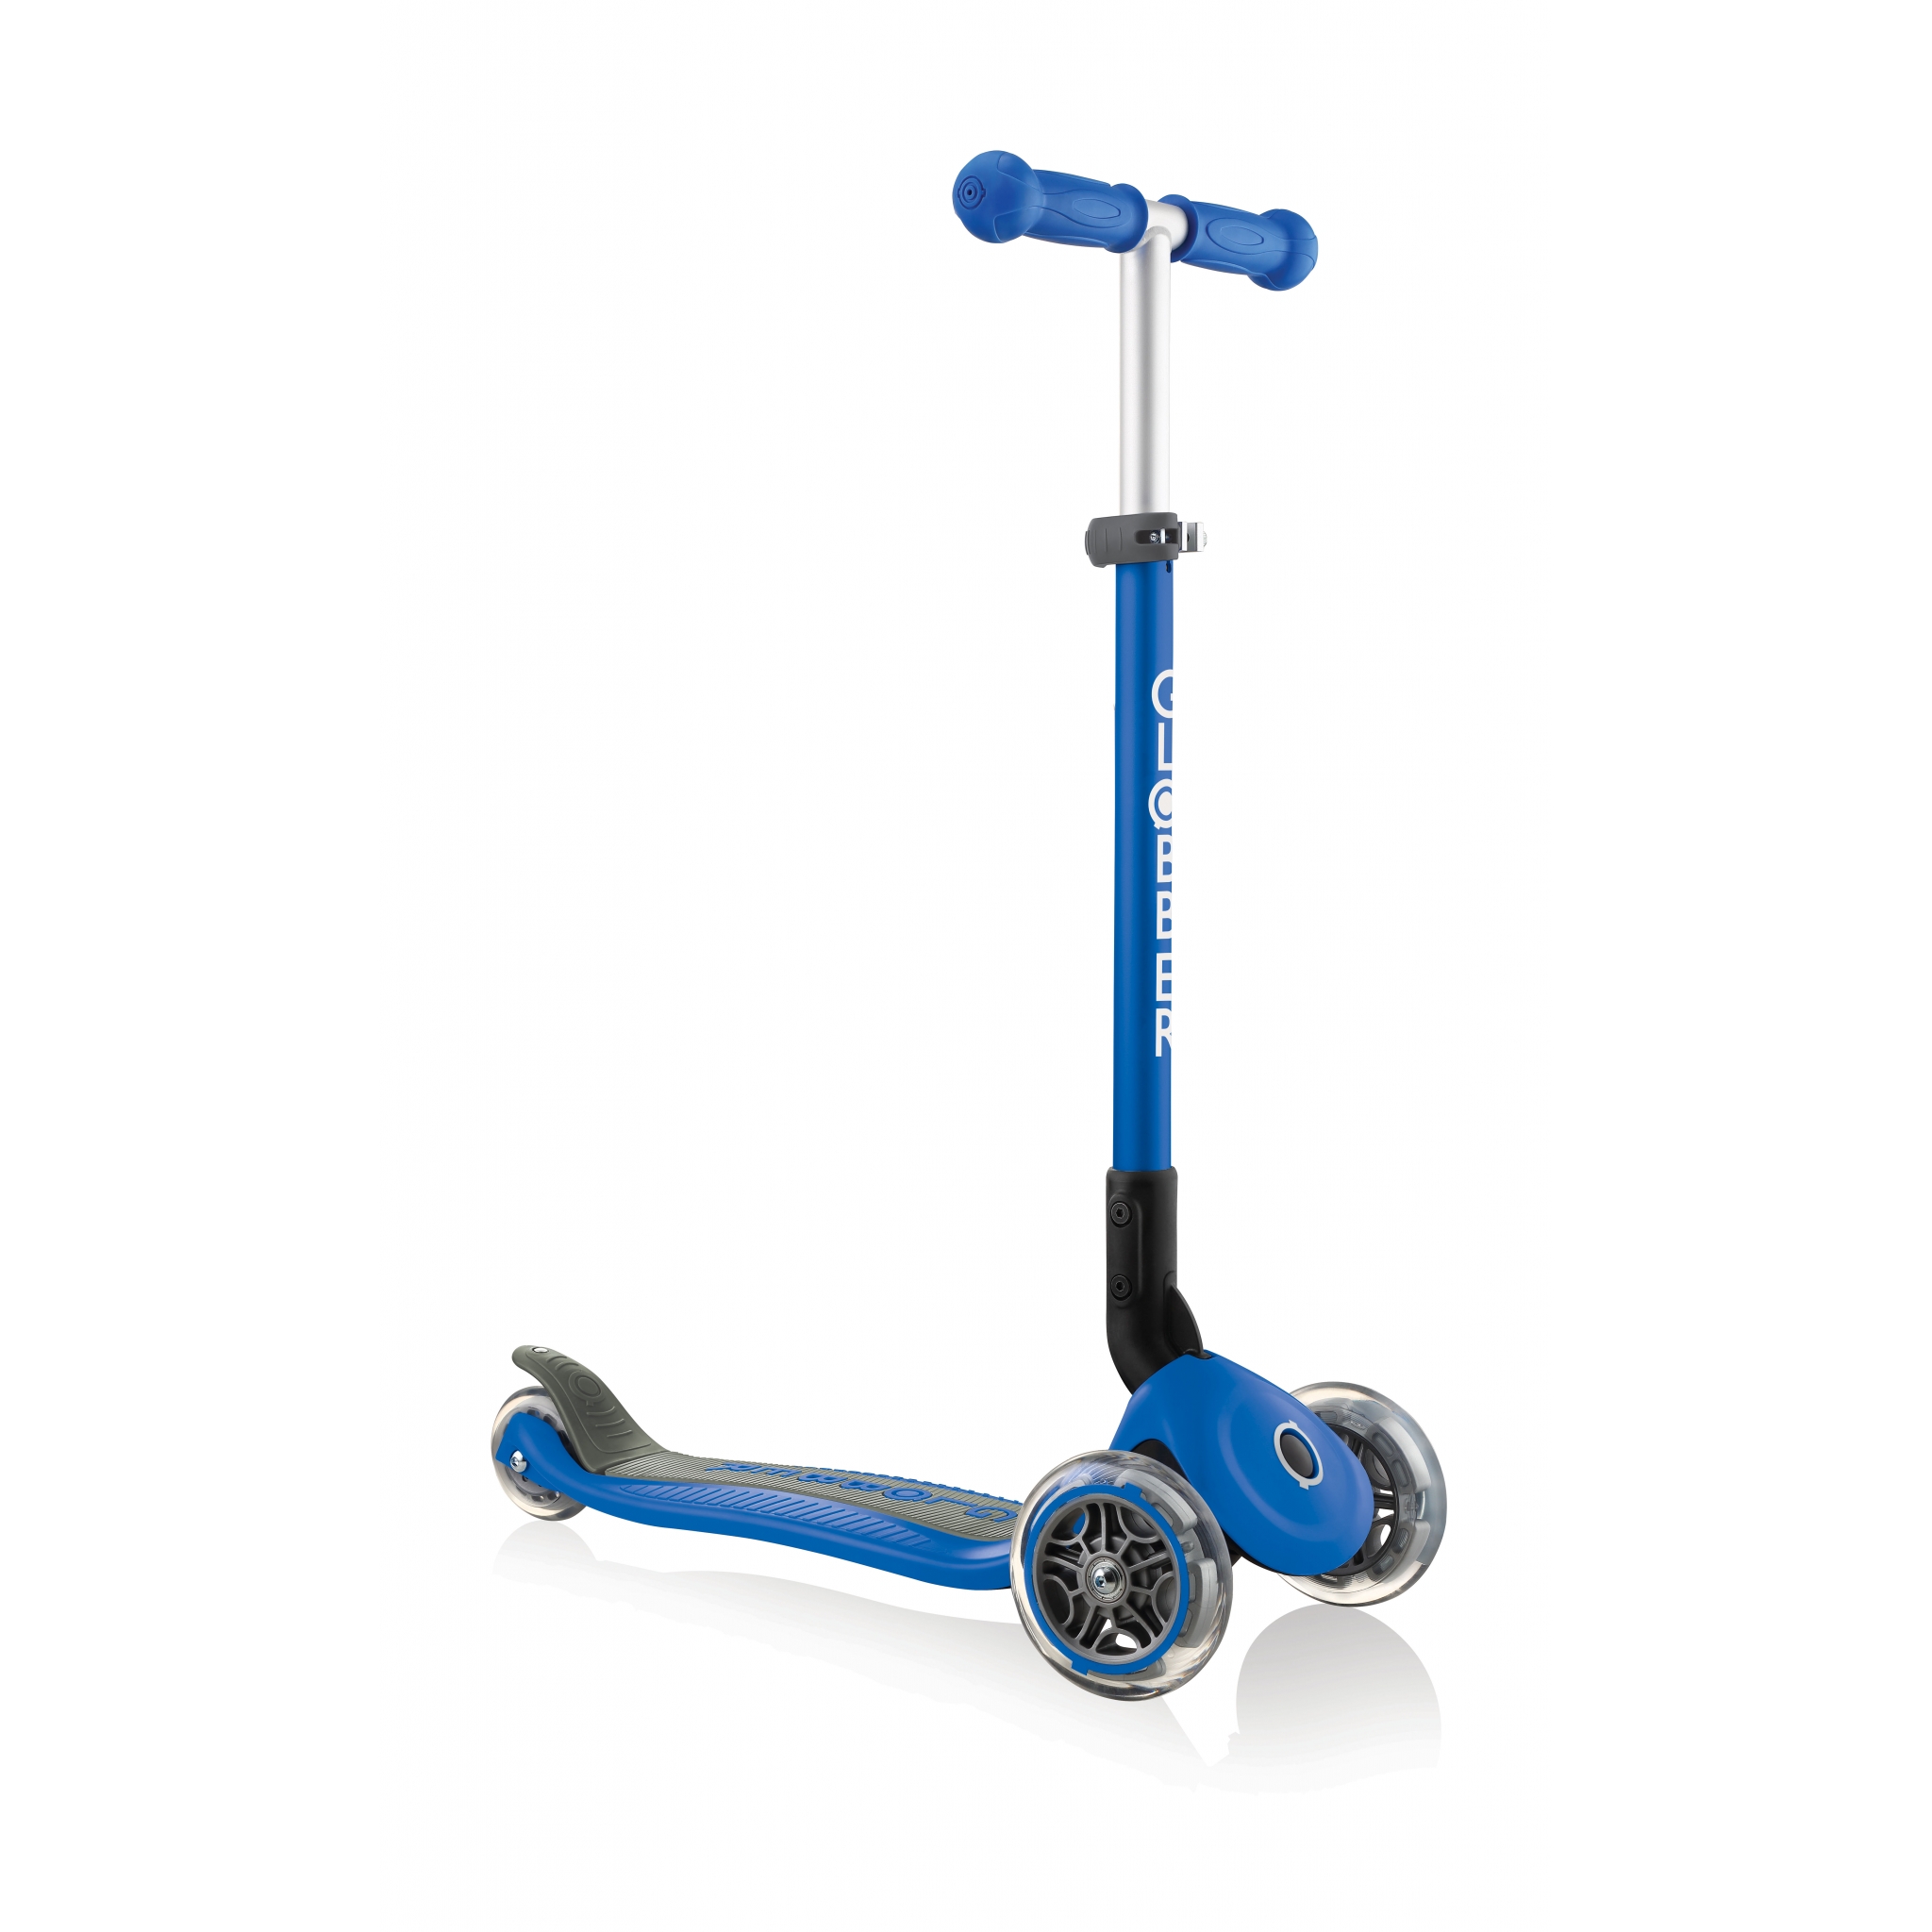 PRIMO-FOLDABLE-3-wheel-foldable-scooter-for-kids-navy-blue 2